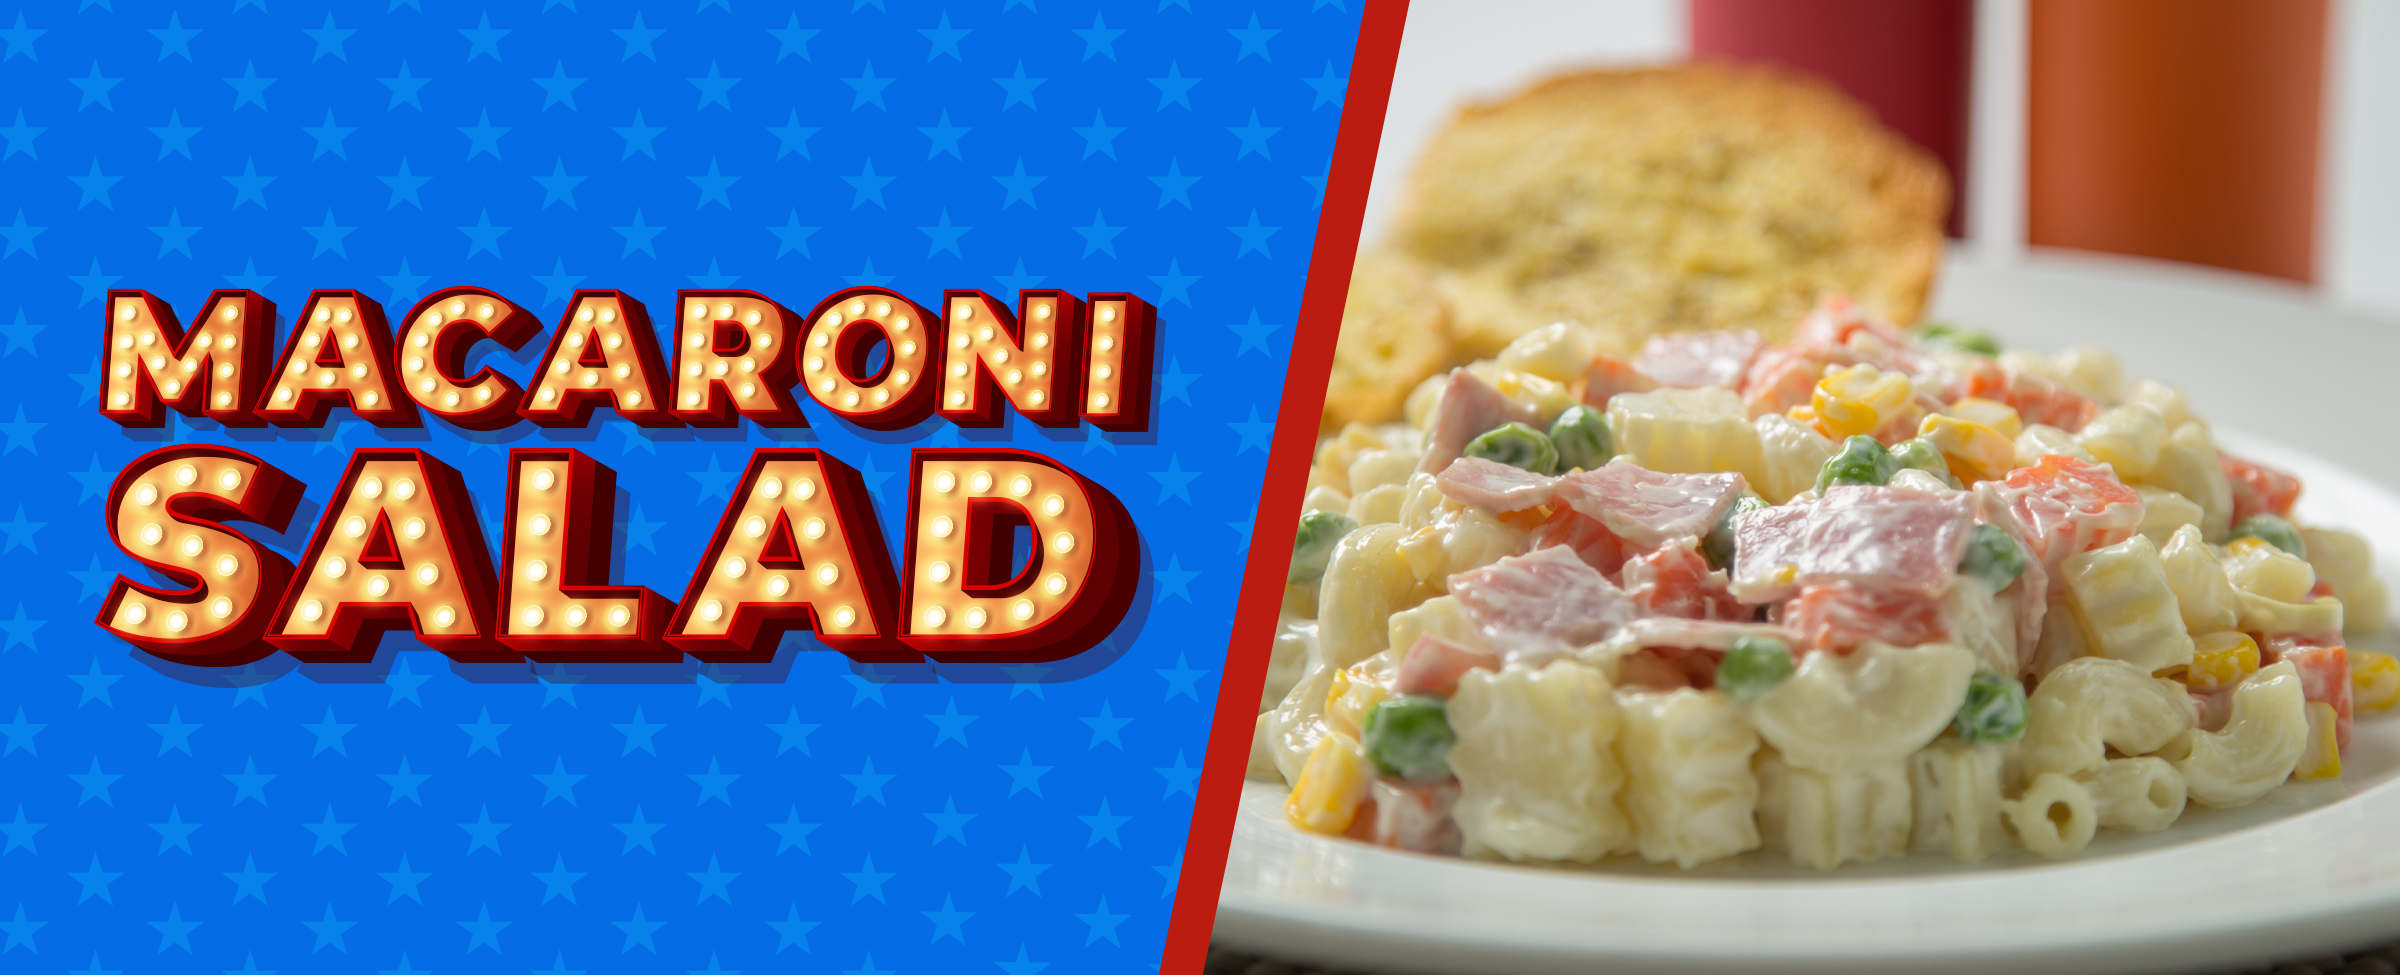 On the left, an illustrated Vegas-style sign saying "Macaroni Salad" against a Memorial Day-colored background with blue stars; while on the right, a photo showcases a white bowl filled with macaroni salad and a slightly blurred bread slice in the background.